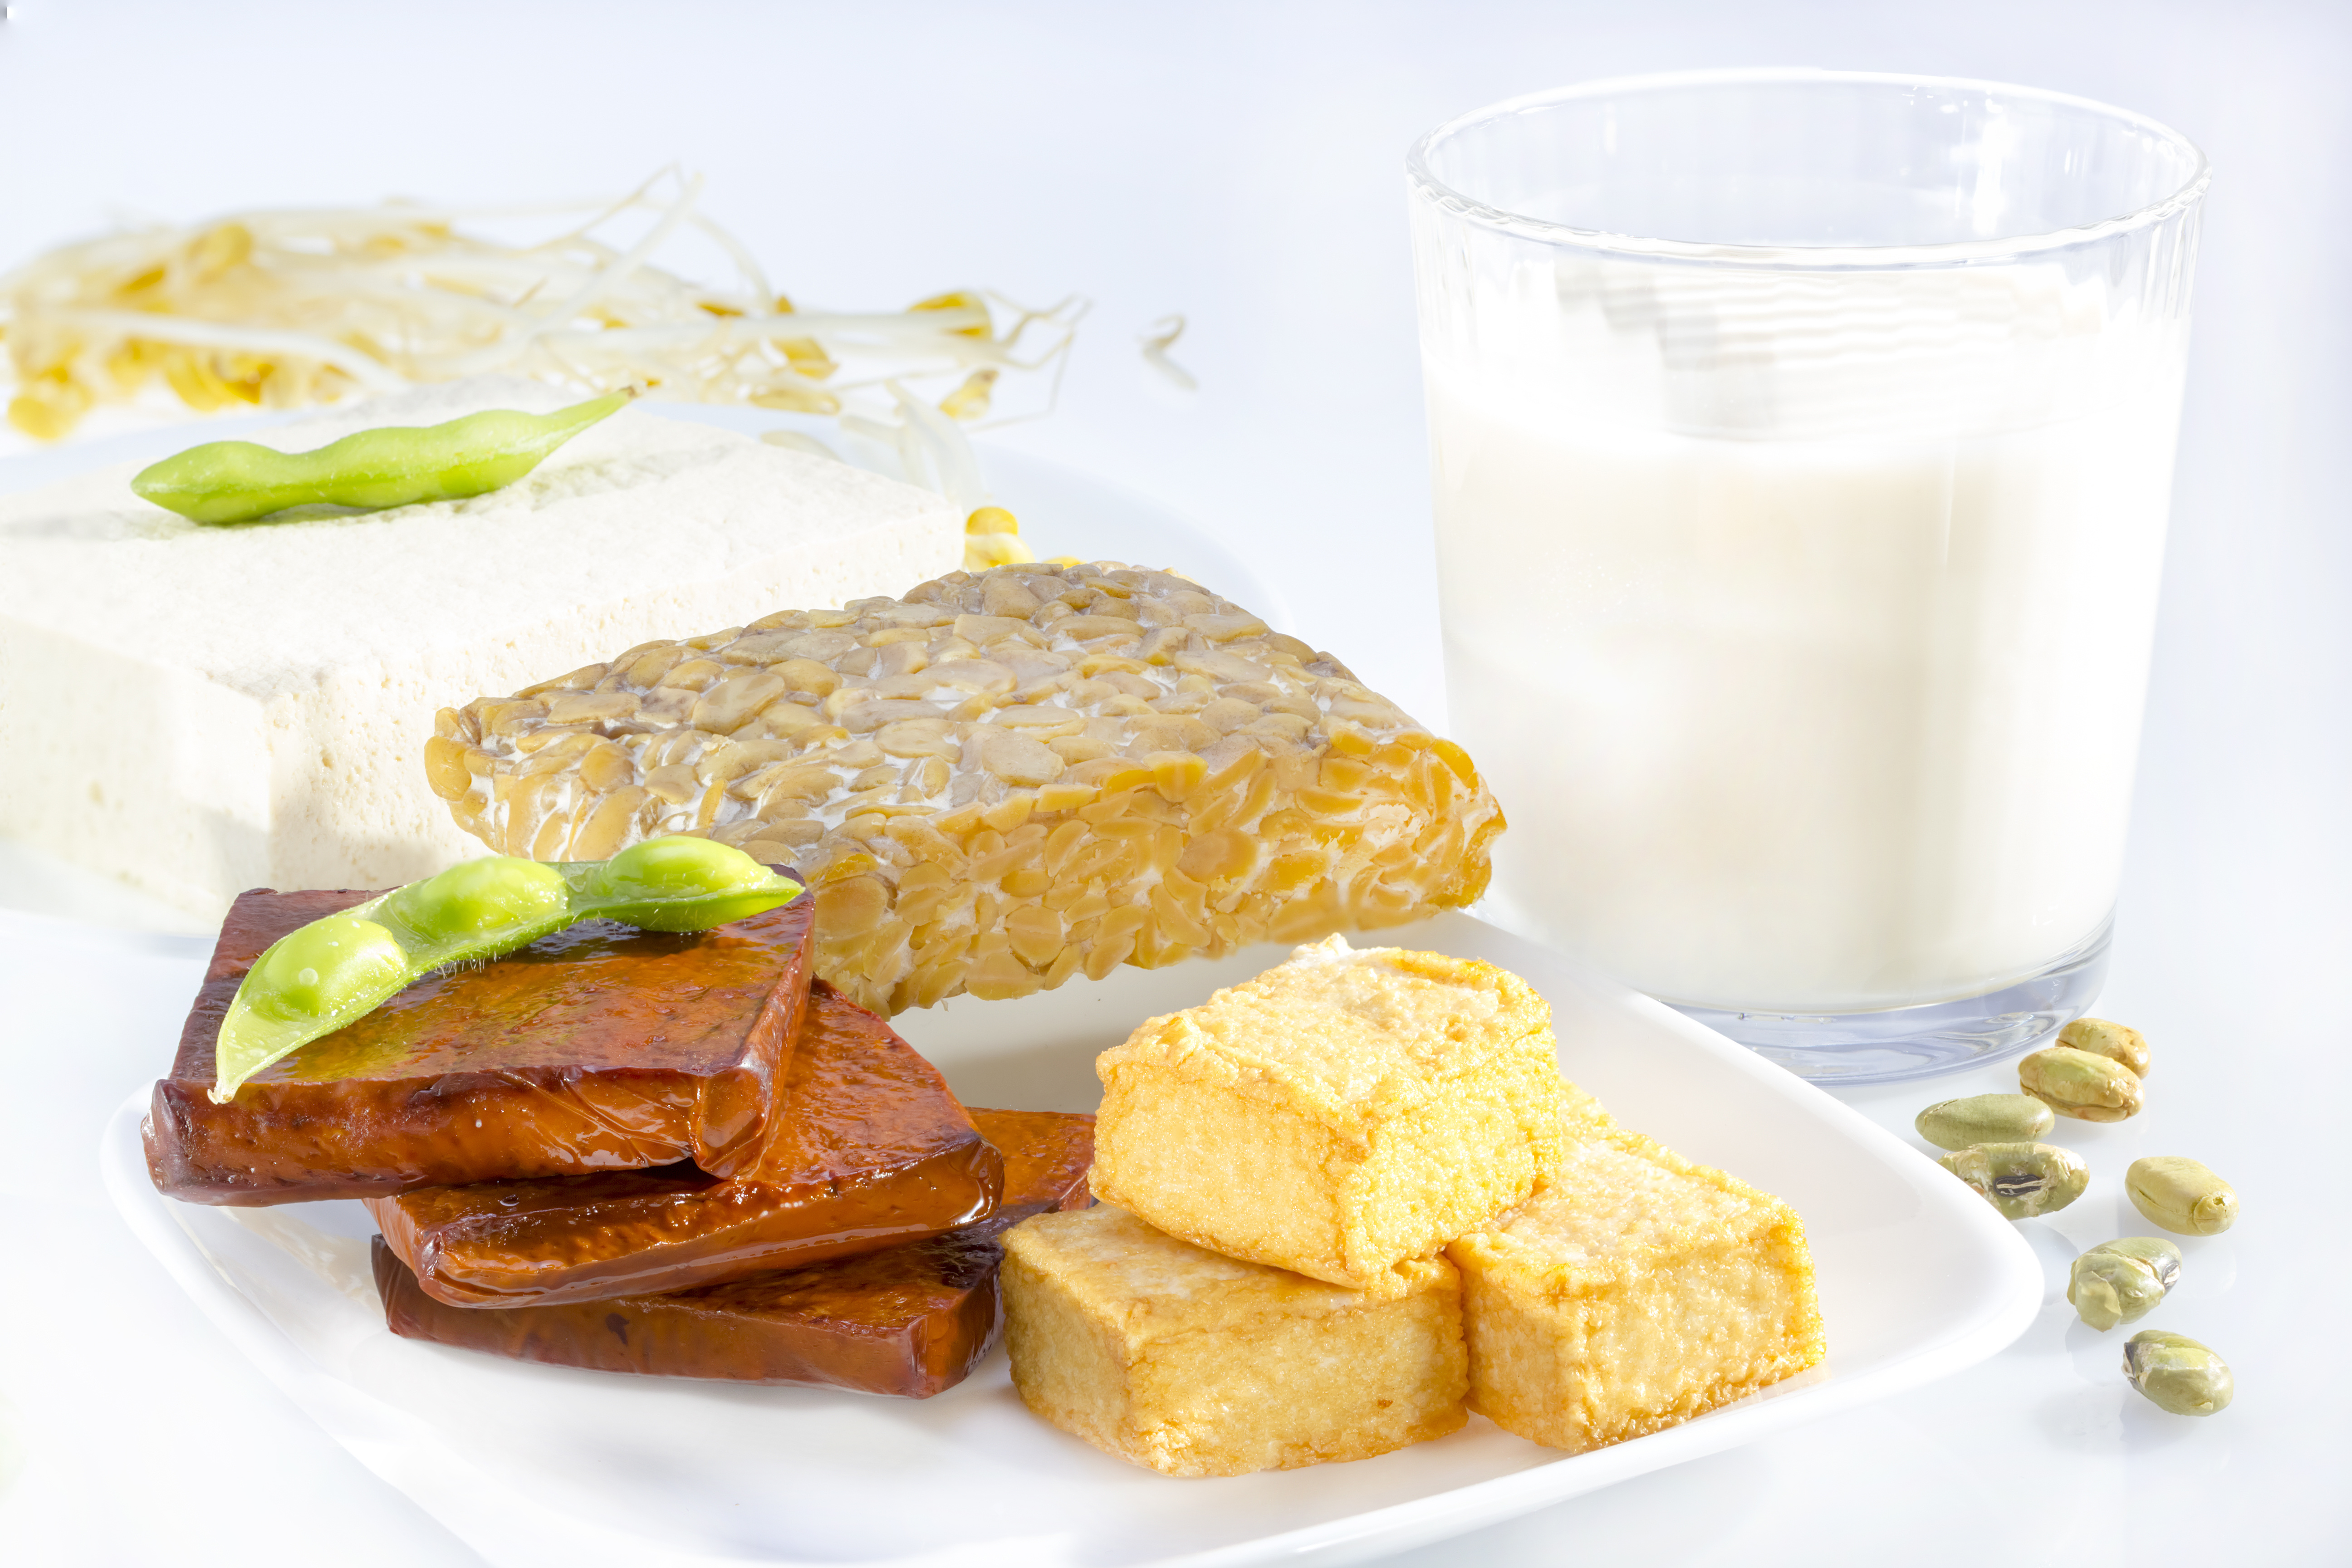 Variety of soy products including tofu, tempeh, milk and sprouts.